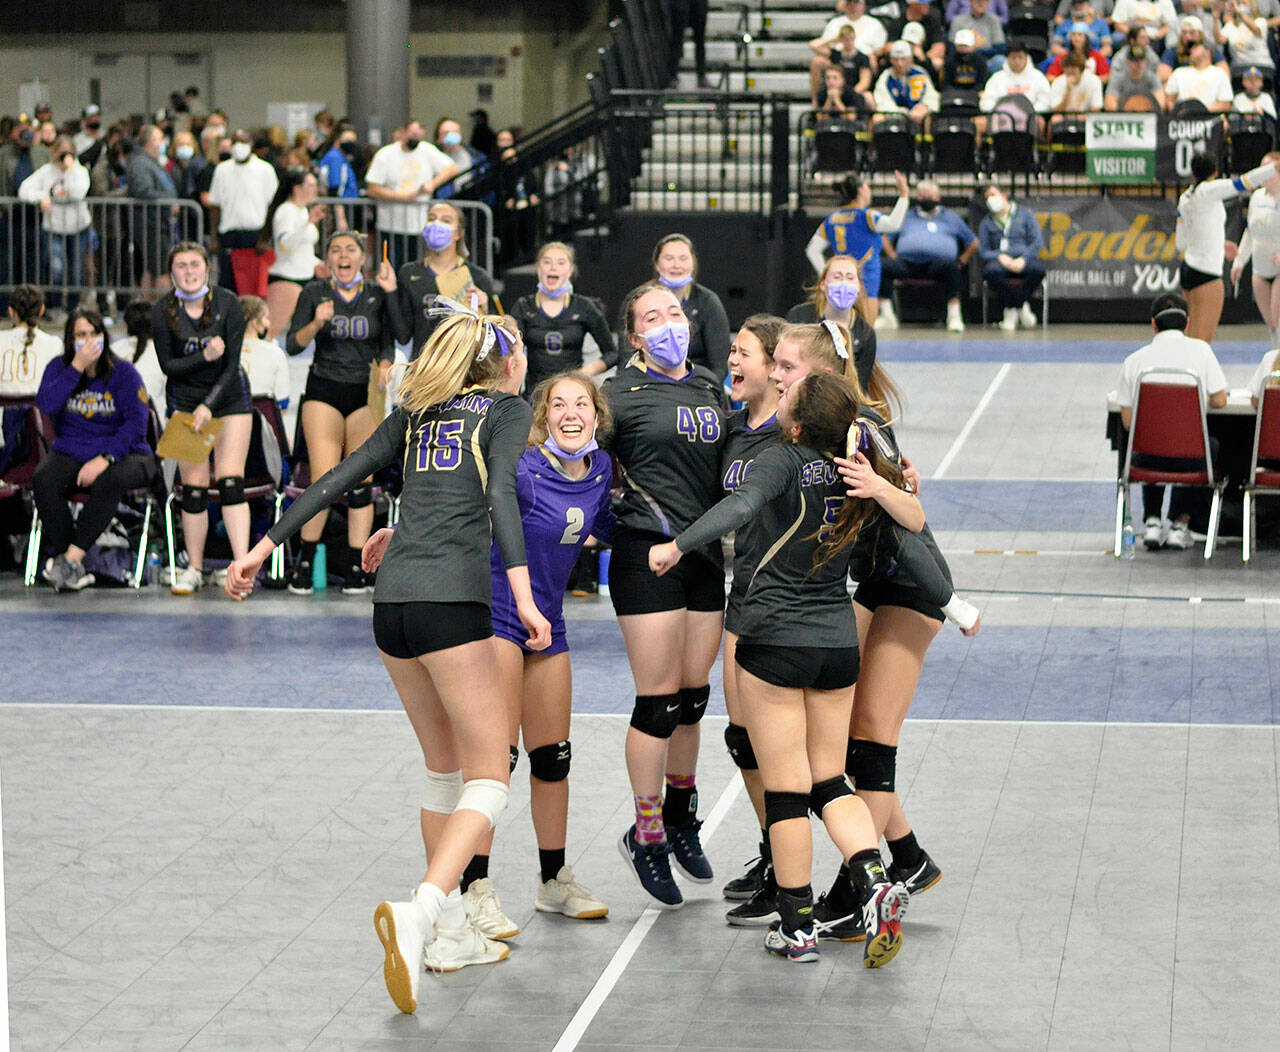 Sequim teammates celebrate at point at the state 2A volleyball tournament in Yakima on Nov. 19. Pictured, from left, is Kendall Hastings, Jordan Hegtvedt, Malory Morey, Angel Wagner, Jolene Vaara and Allie Gale. Photo by Wendy Morey